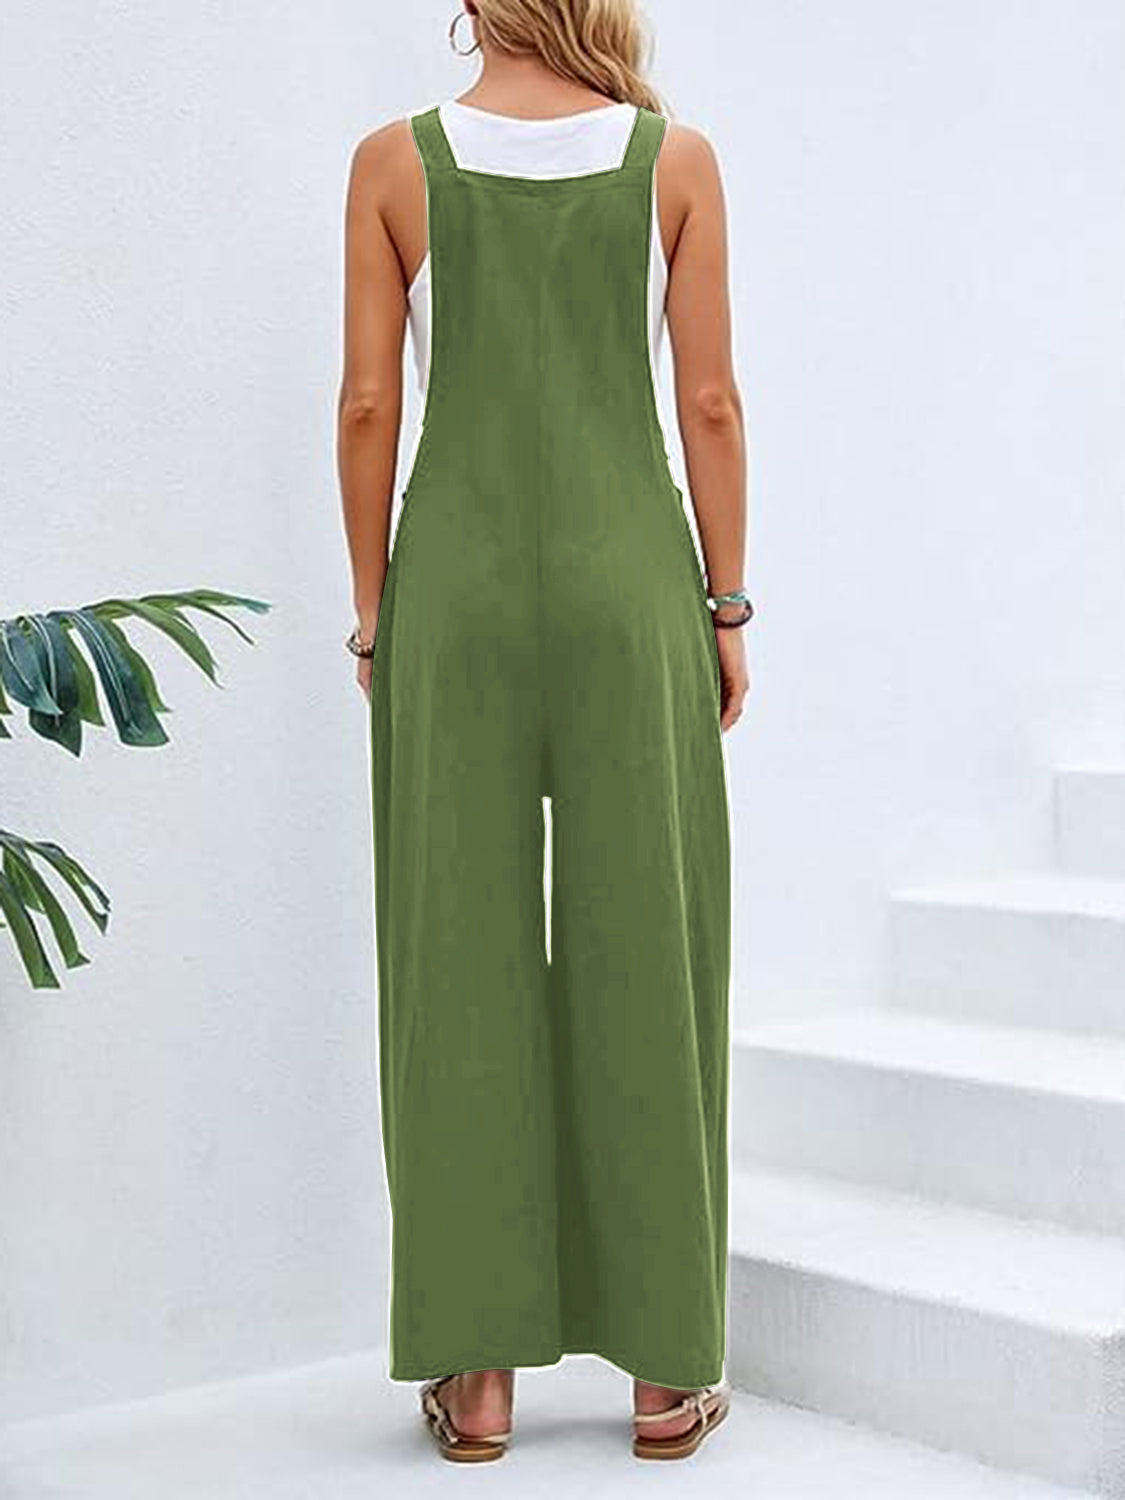 Wide Leg Overalls with Pockets - Bottoms - Overalls - 14 - 2024